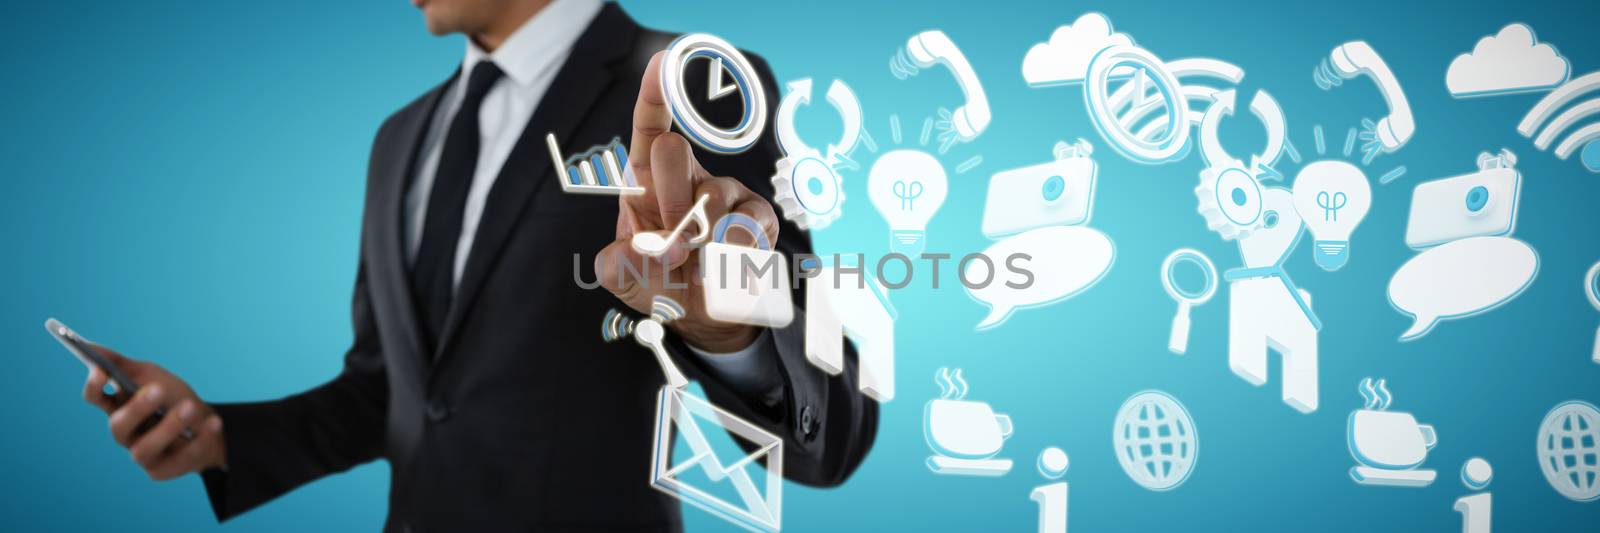 Composite image of mid section of businessman using phone while touching invisible interface by Wavebreakmedia